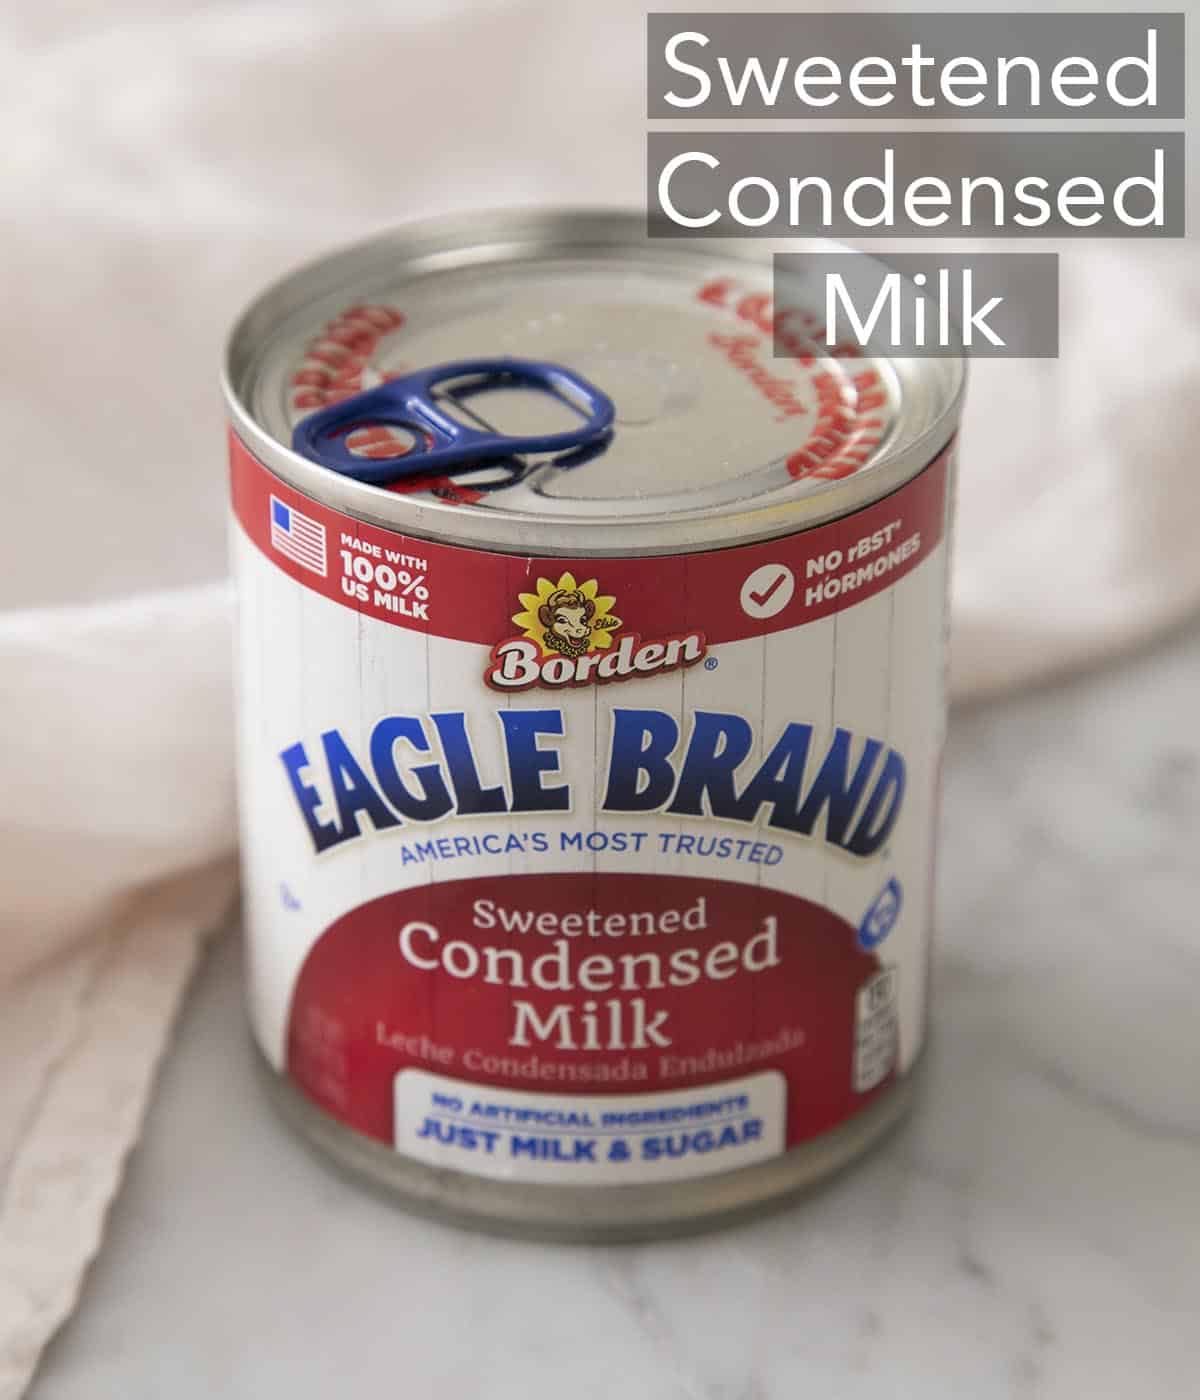 A can of sweetened condensed milk on a marble counter.